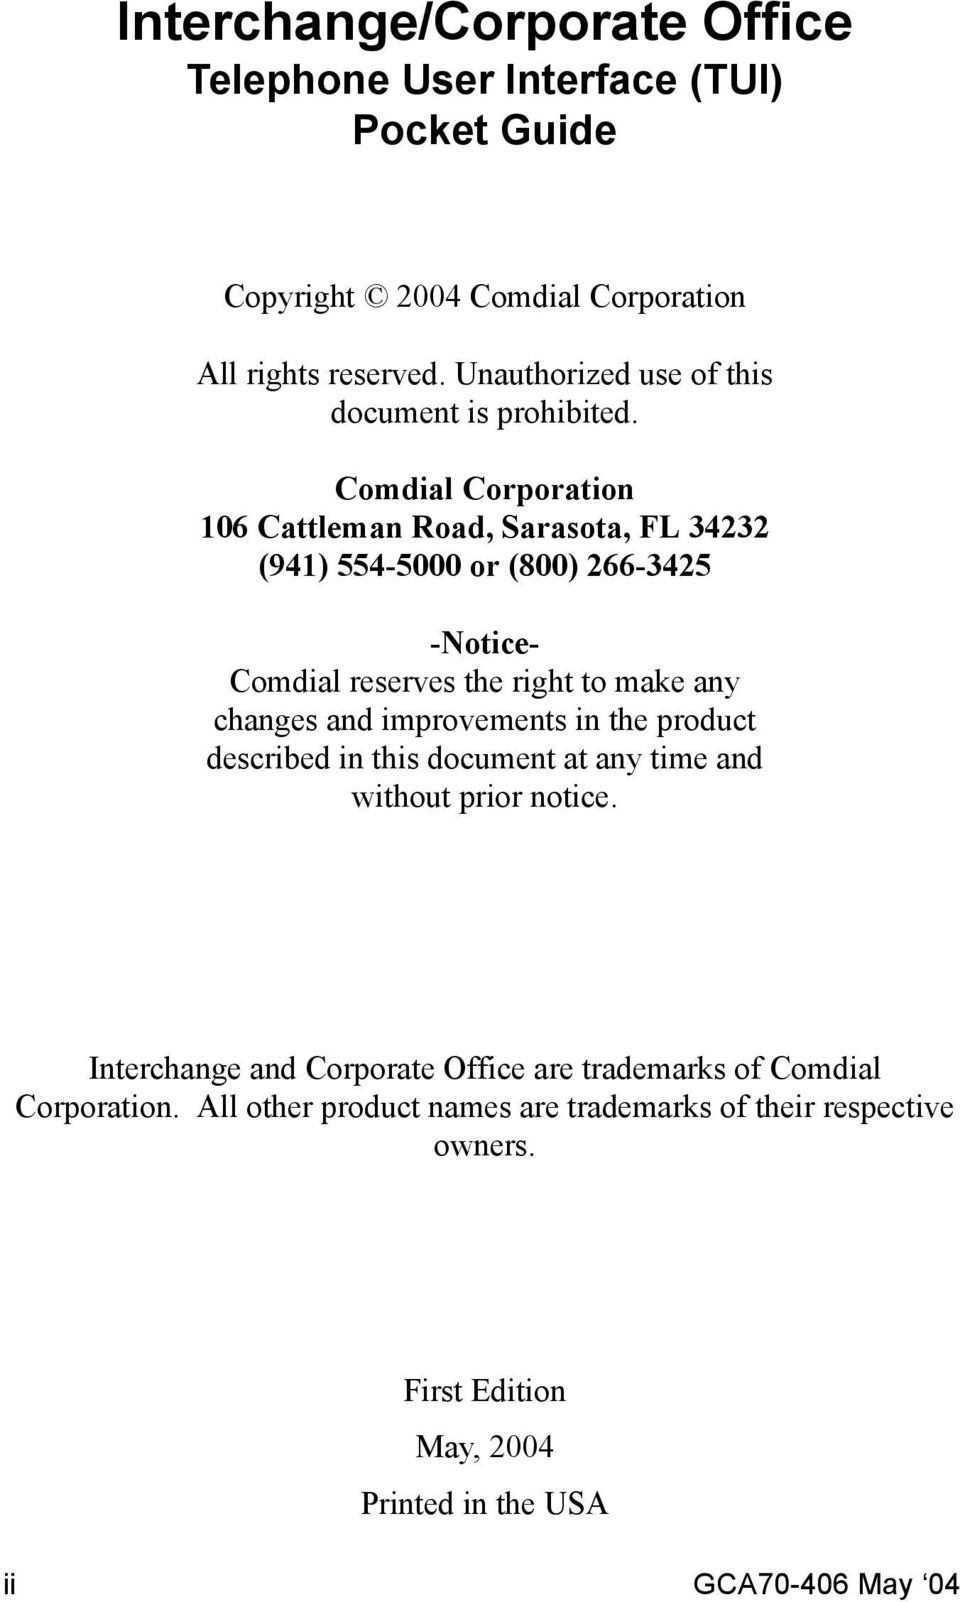 Comdial Corporation 106 Cattleman Road, Sarasota, FL 34232 (941) 554-5000 or (800) 266-3425 -Notice- Comdial reserves the right to make any changes and